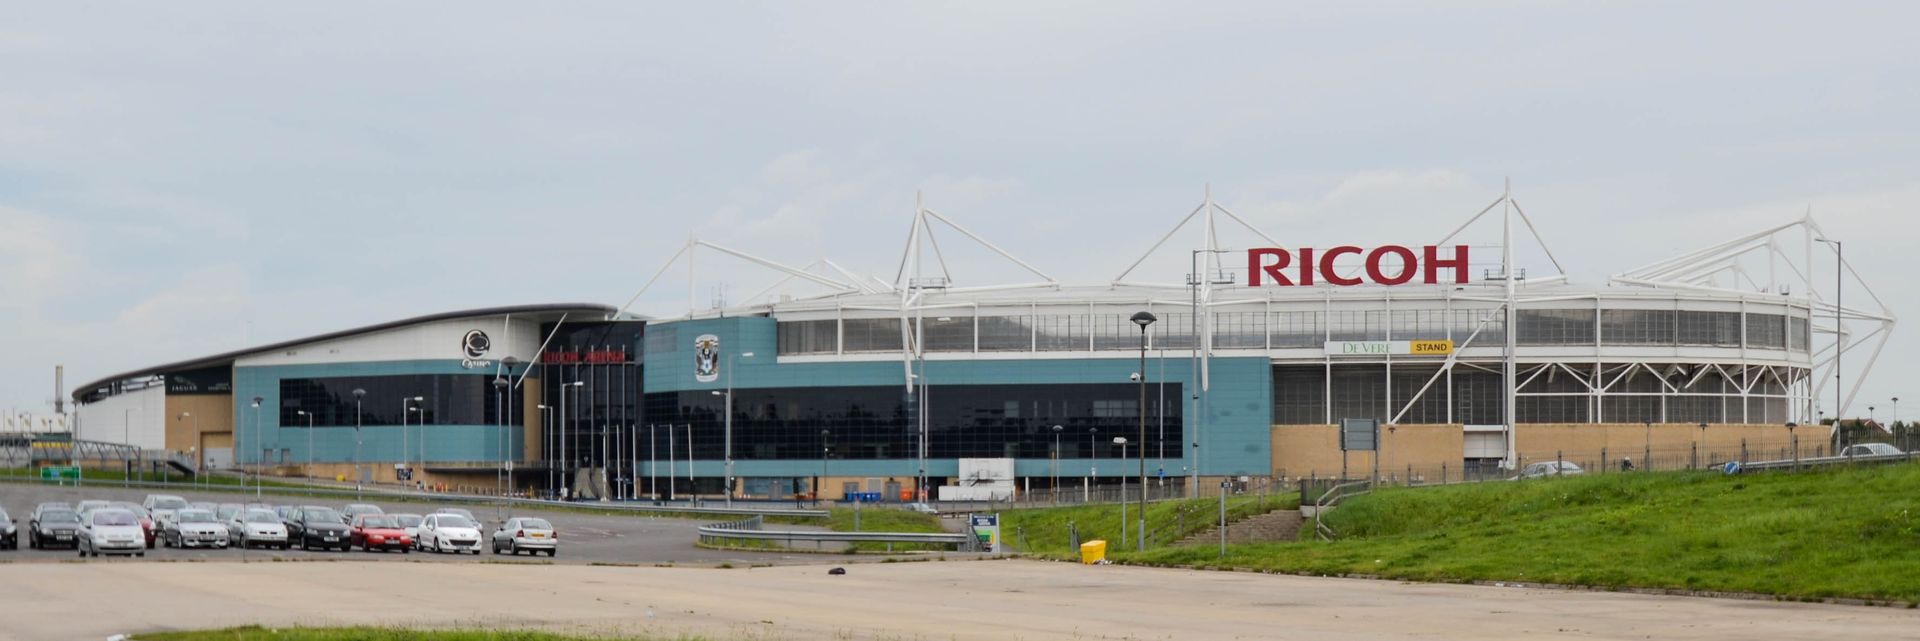 RICOH Arena Coventry